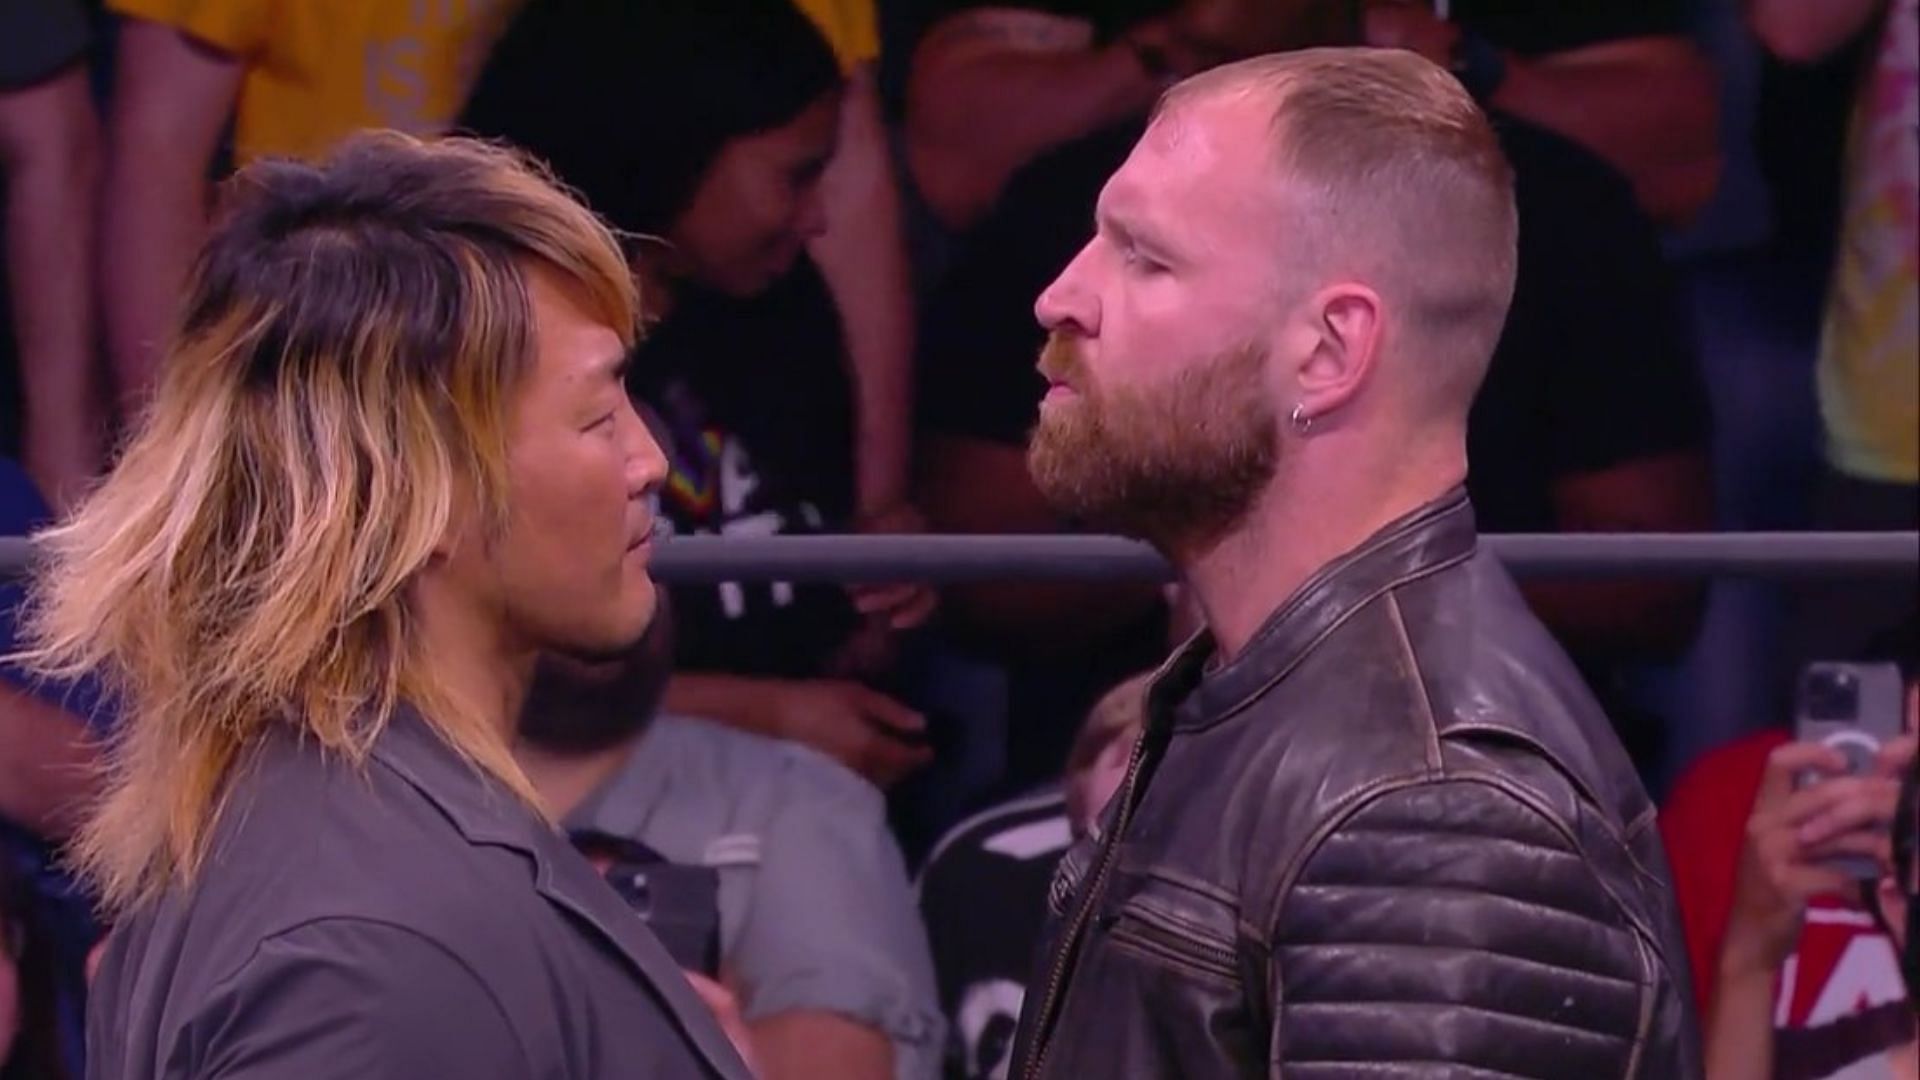 Jon Moxley will stand against Hiroshi Tanahashi for the Interim AEW title at Forbidden Door.